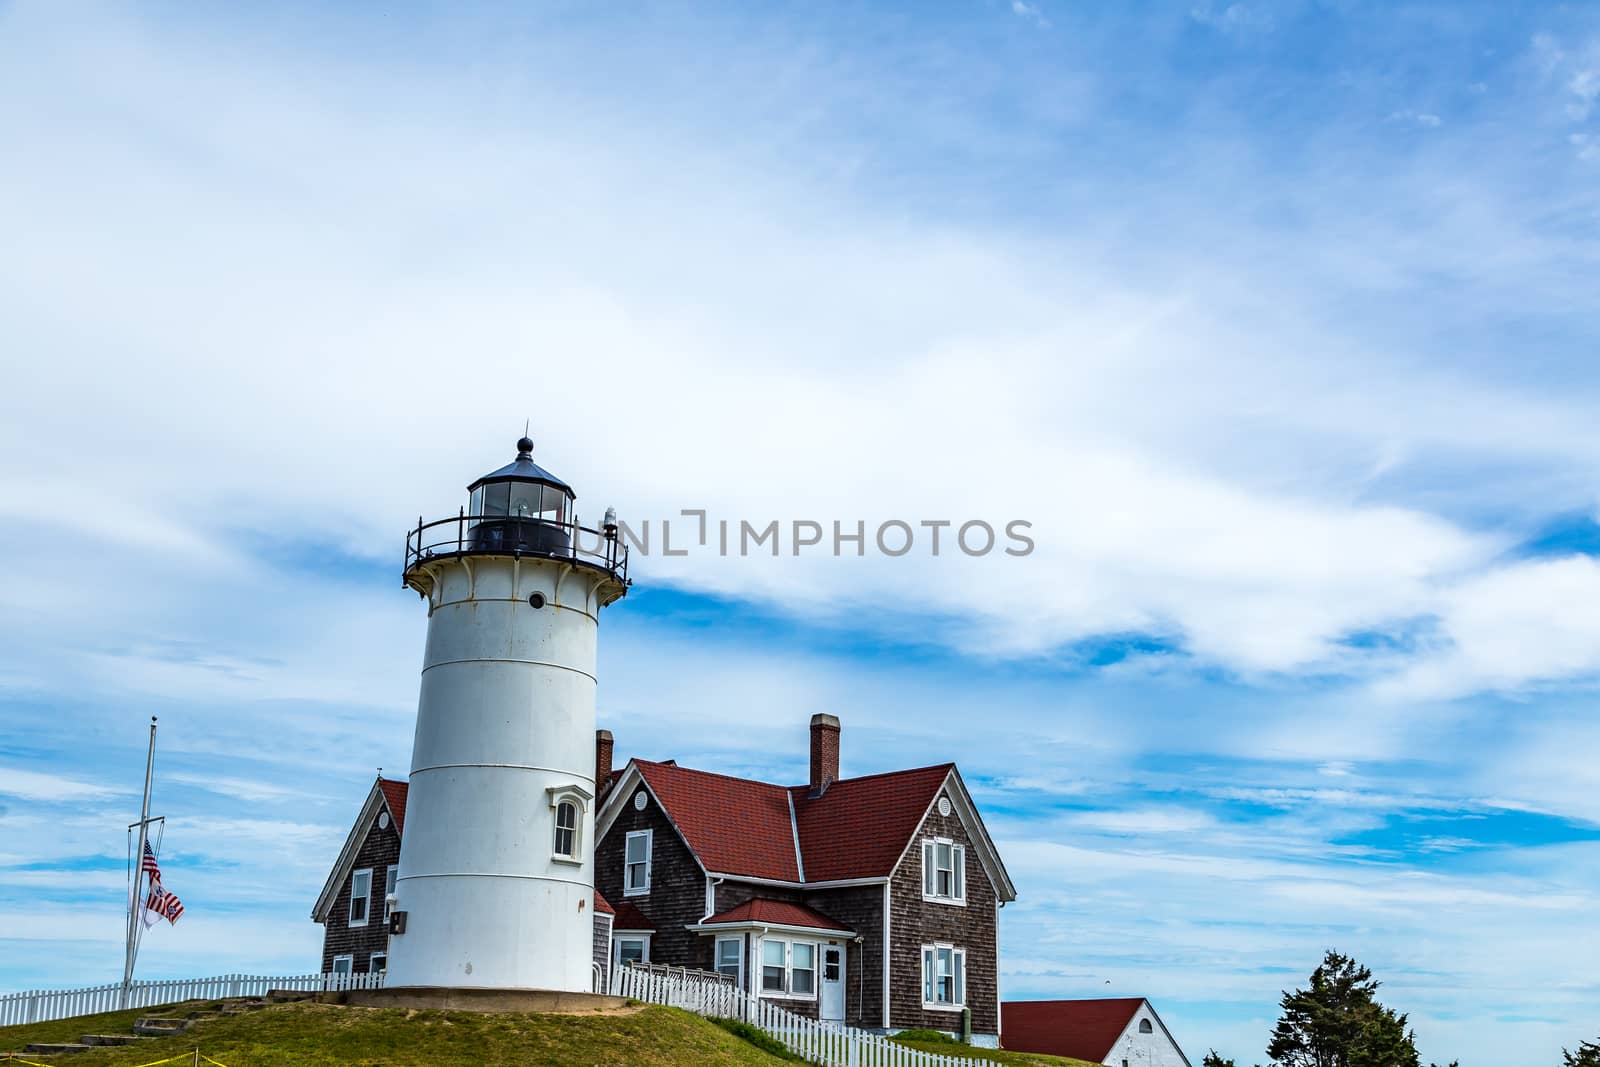 Nobska Light, or Nobsque Light, also known as Nobska Point Light is a lighthouse located at the division between Buzzards Bay and Vineyard Sound in Woods Hole, Massachusetts on the southwestern tip of Cape Cod, Massachusetts.